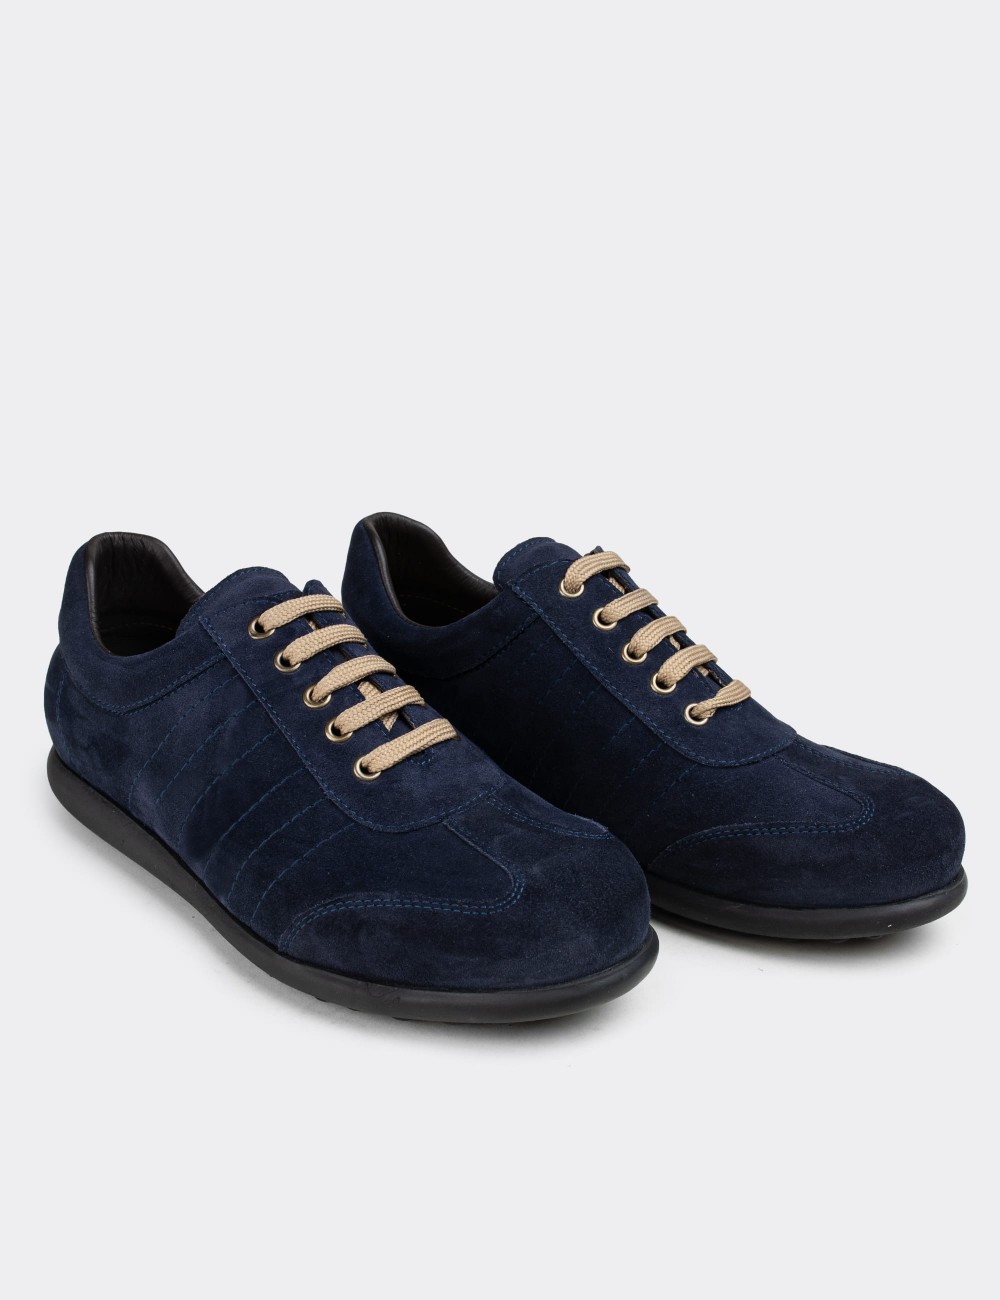 Navy Suede Leather Lace-up Shoes - 01826MLCVC06